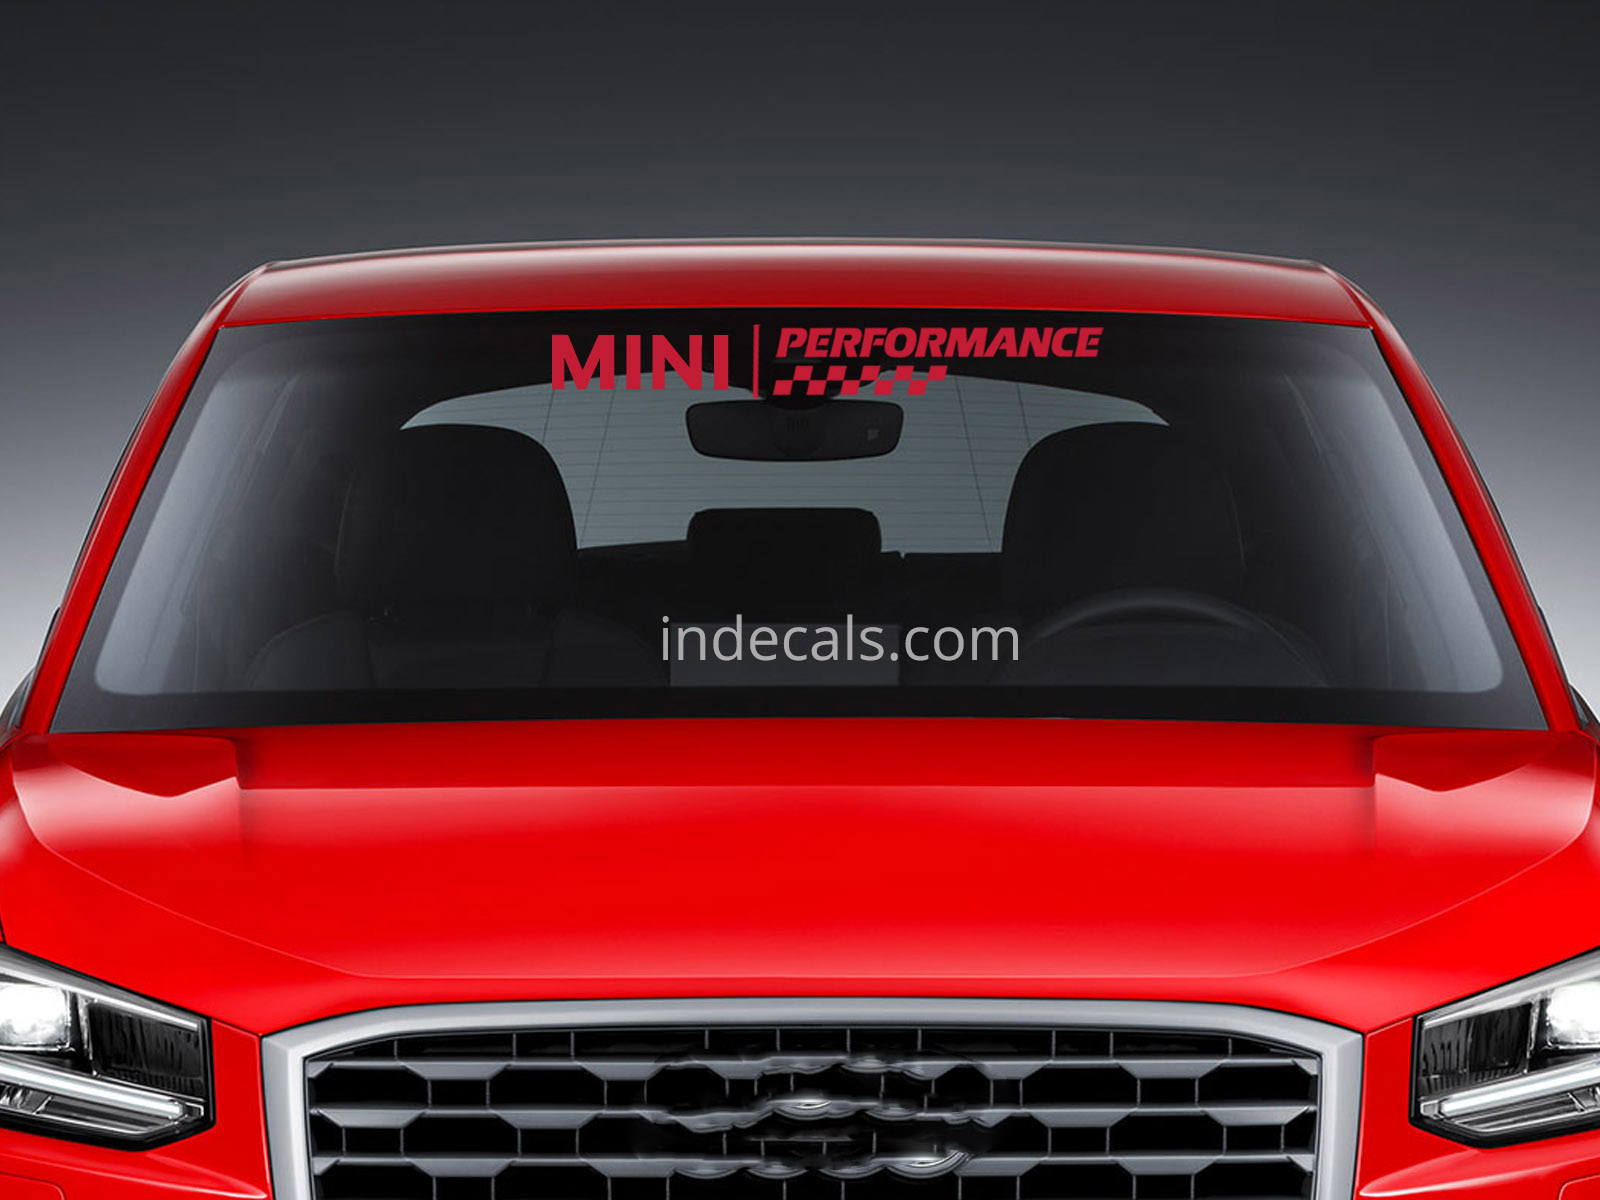 1 x Mini Performance Sticker for Windshield or Back Window - Red